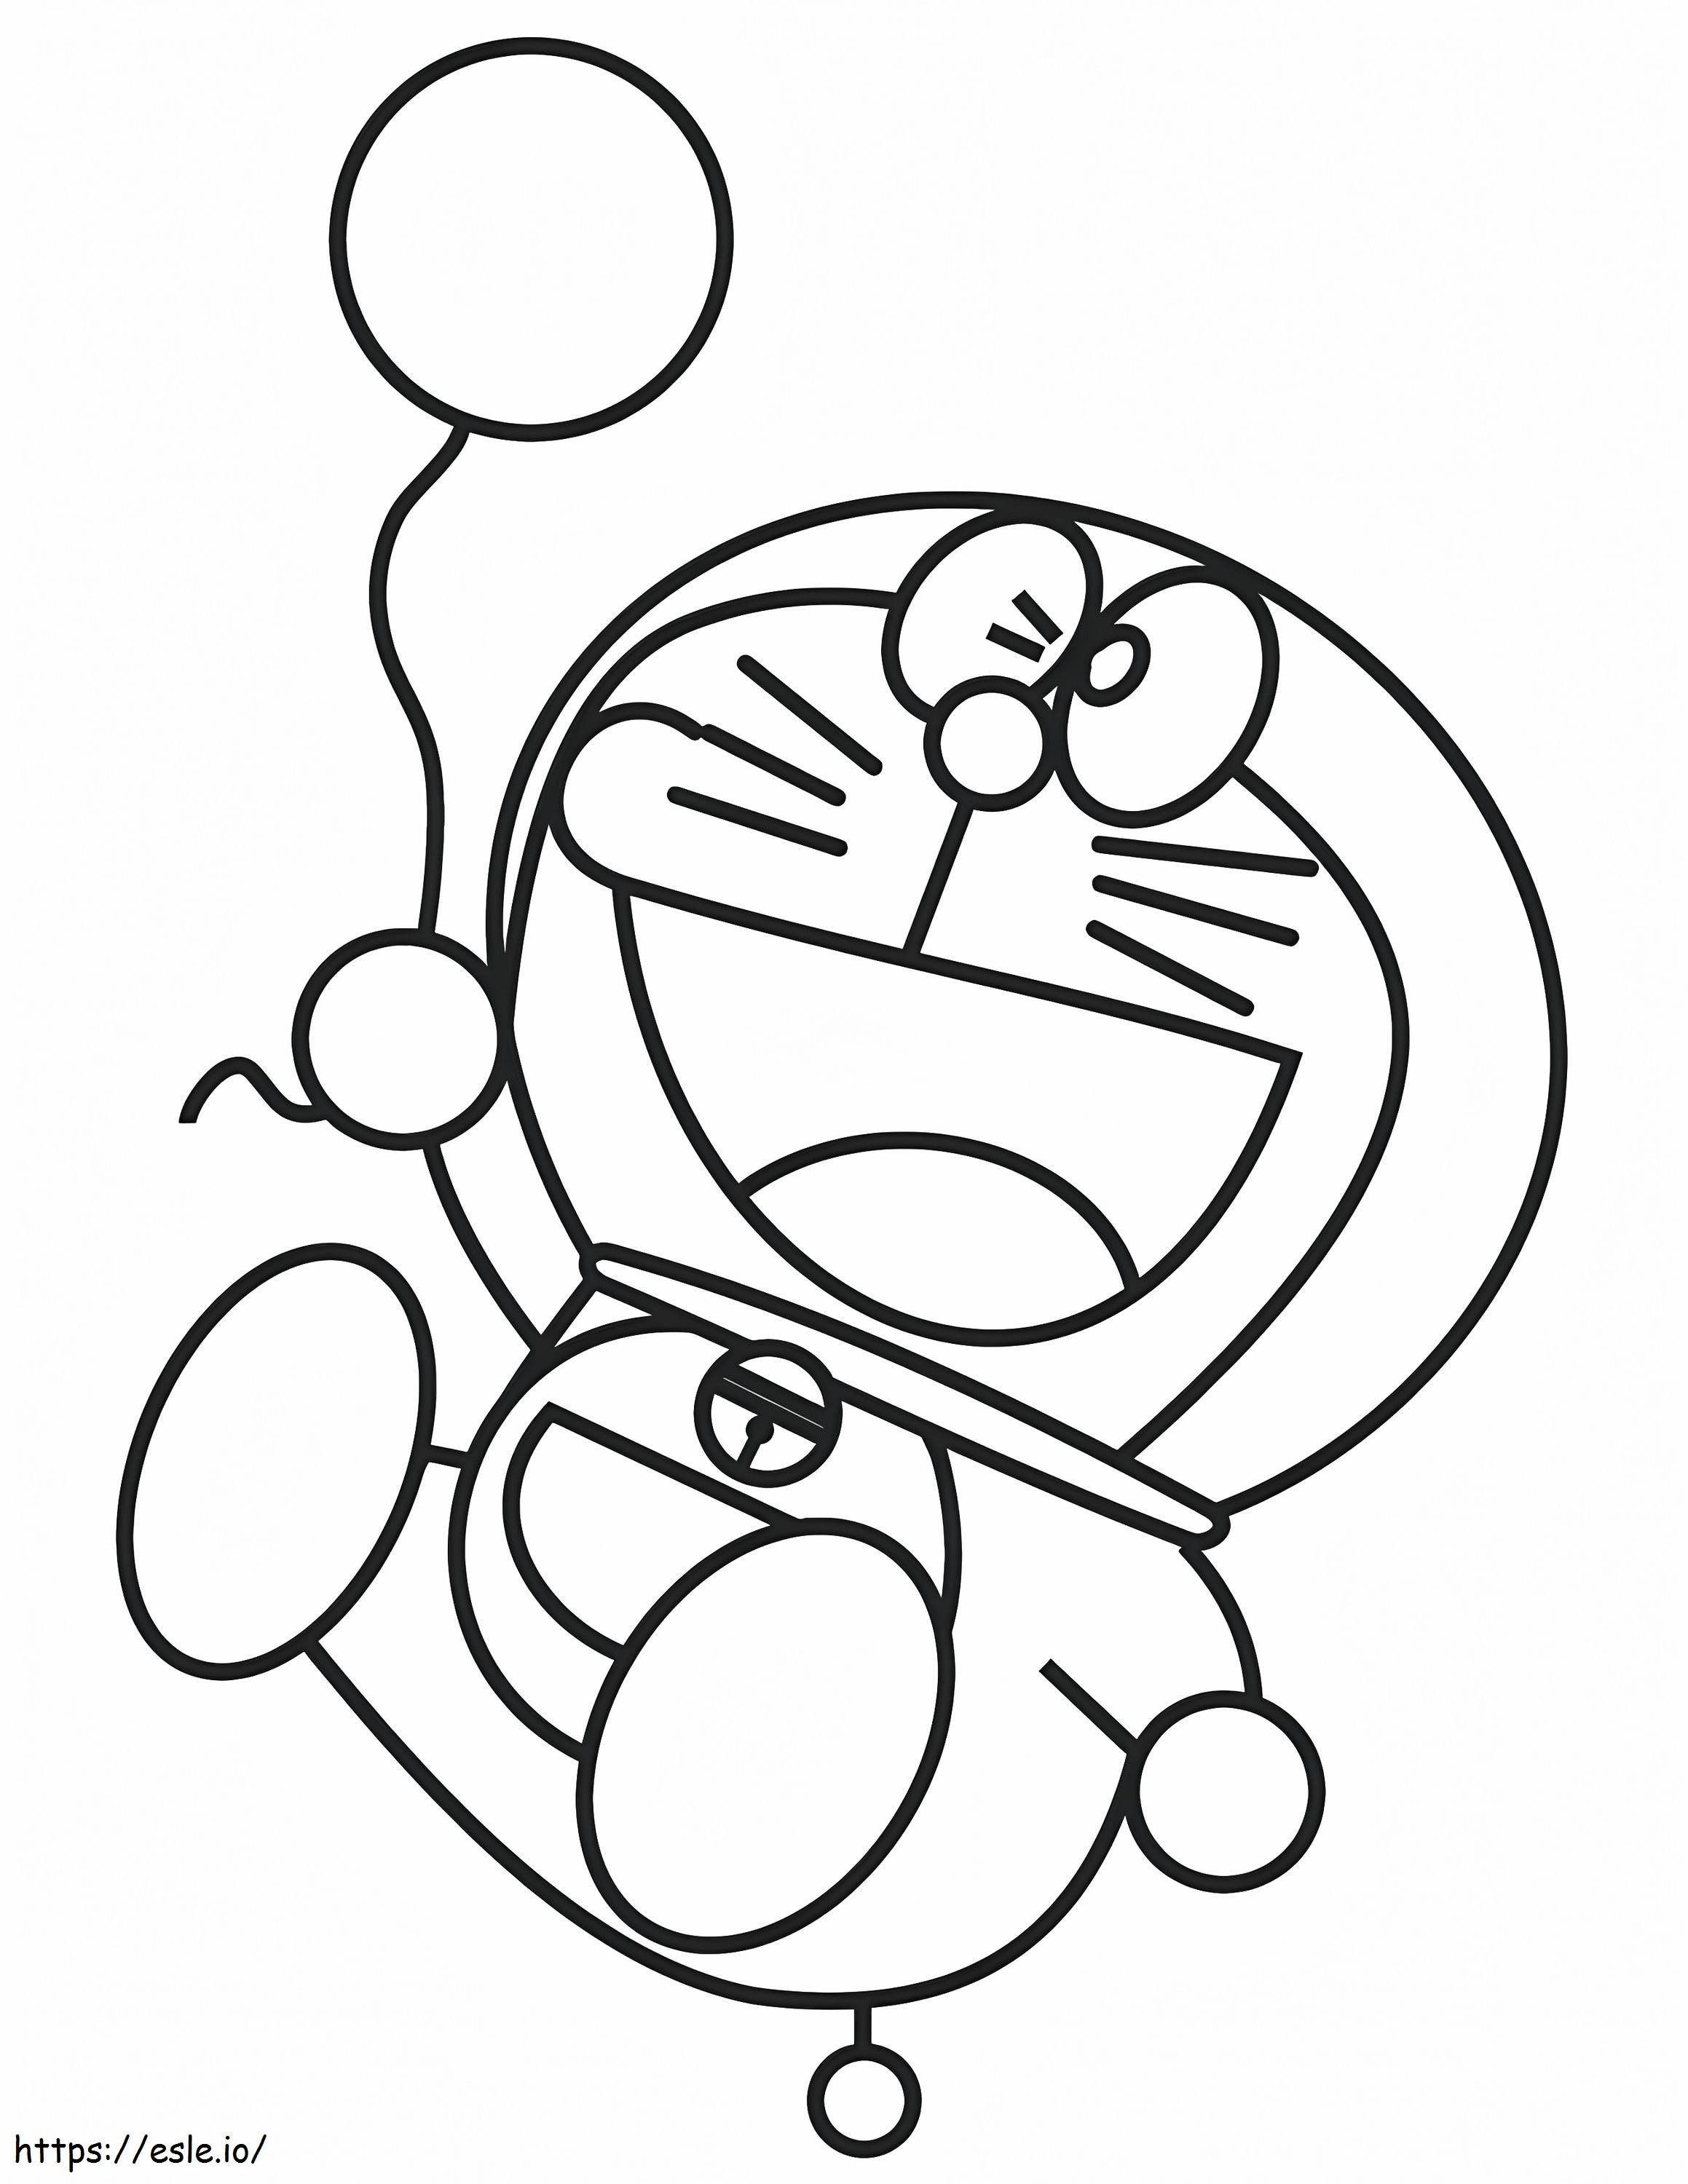 1531277988 Doraemon With A Balloon A4 coloring page